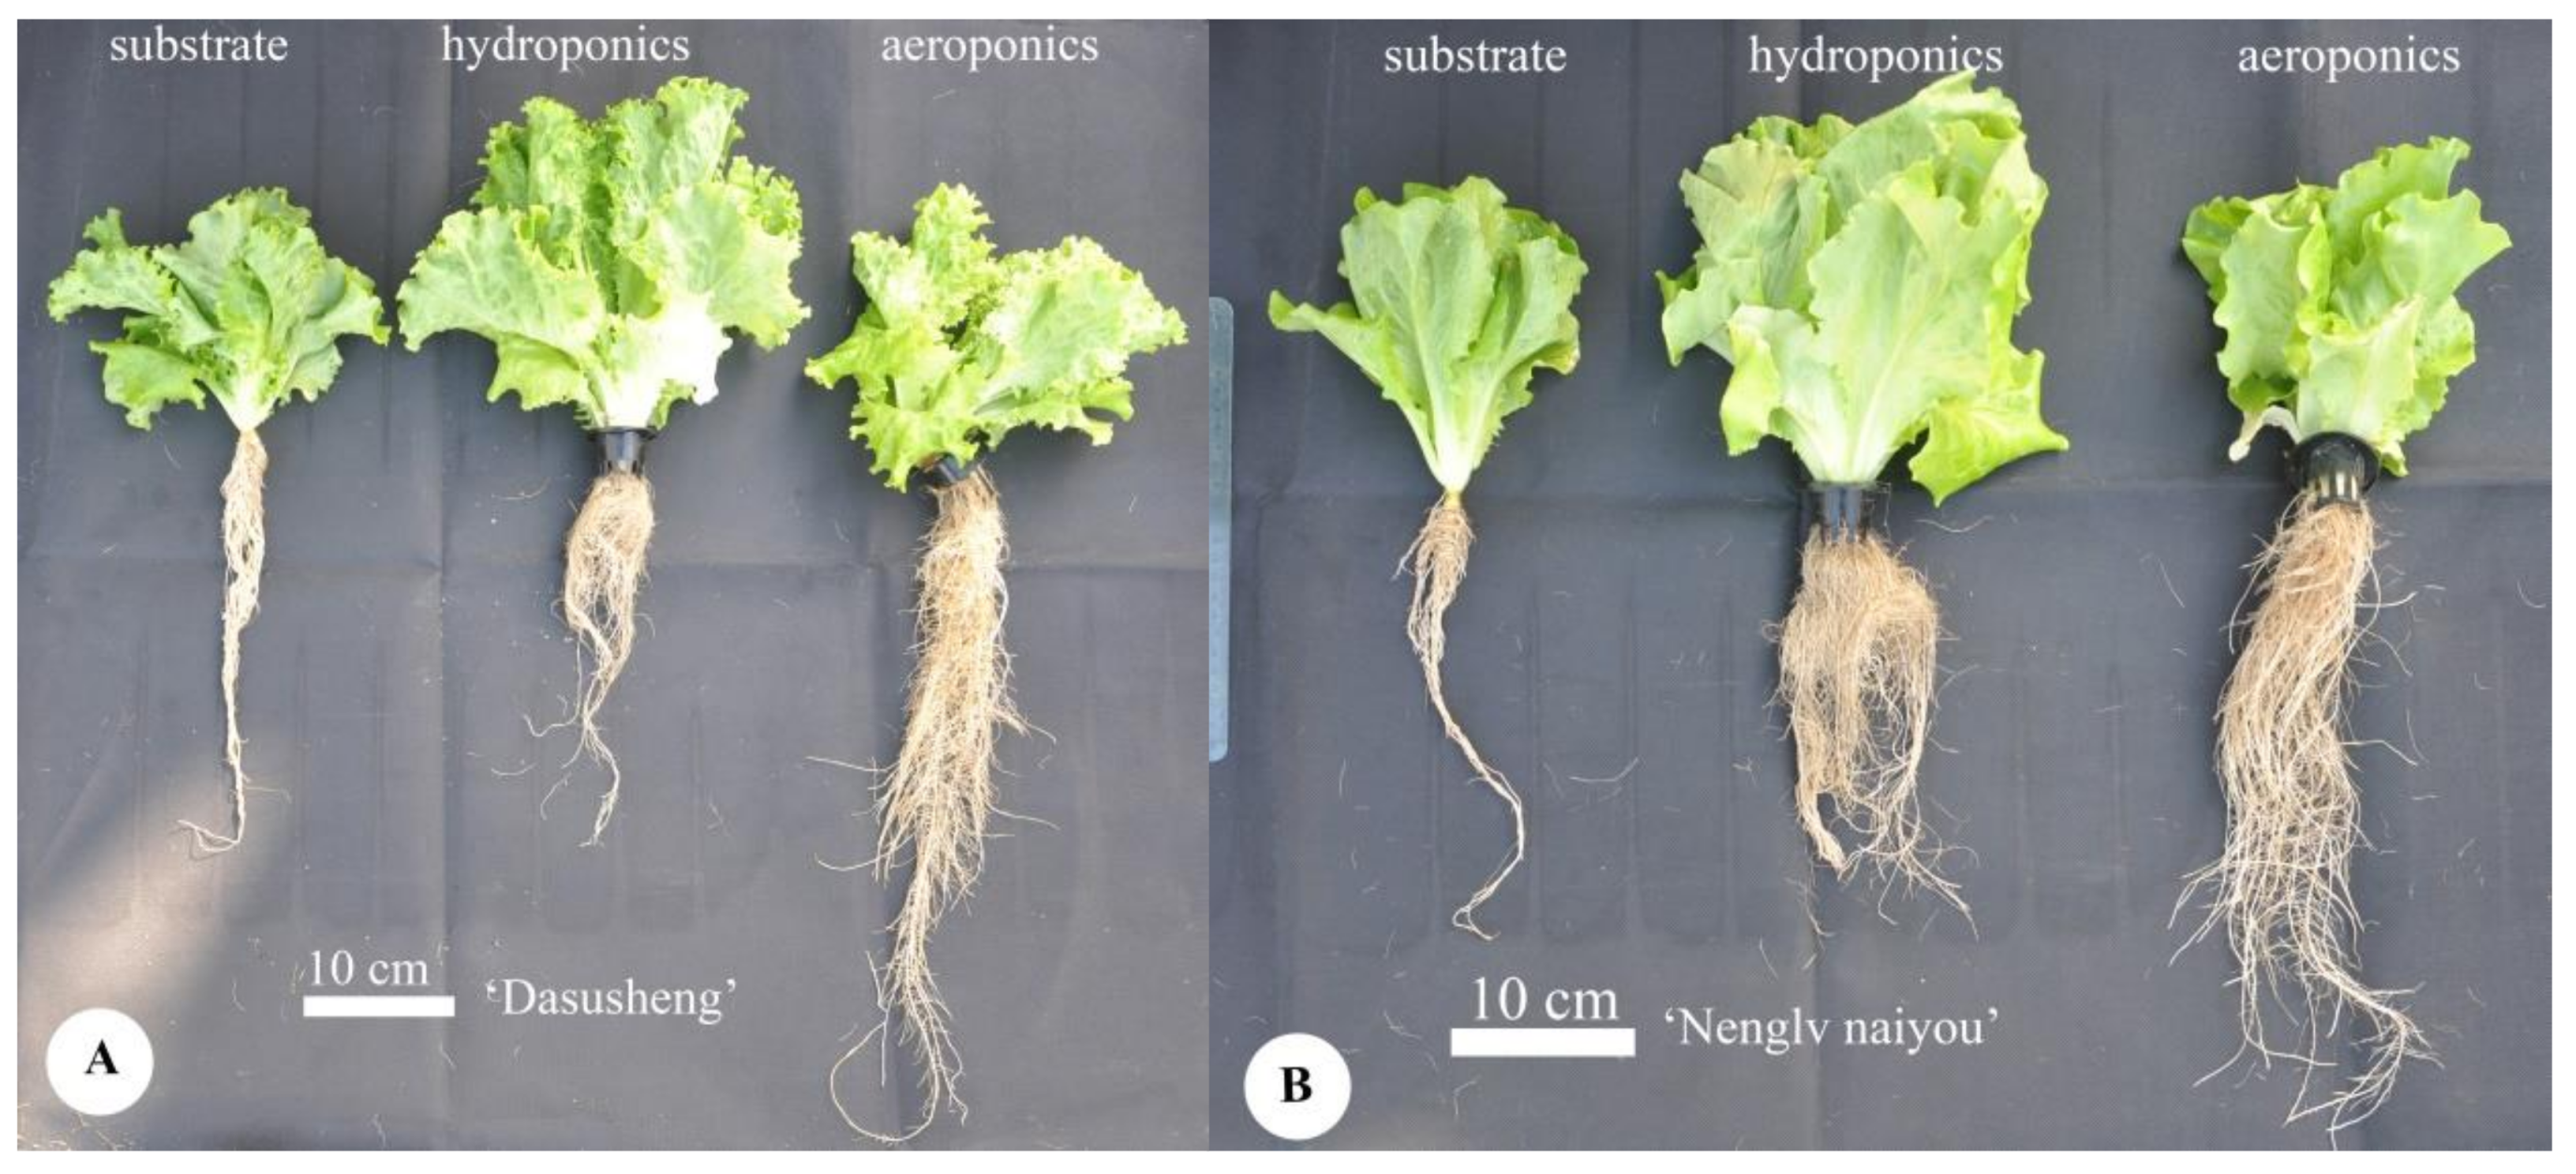 Horticulturae | Free Full-Text | Growth Responses and Root Characteristics  of Lettuce Grown in Aeroponics, Hydroponics, and Substrate Culture